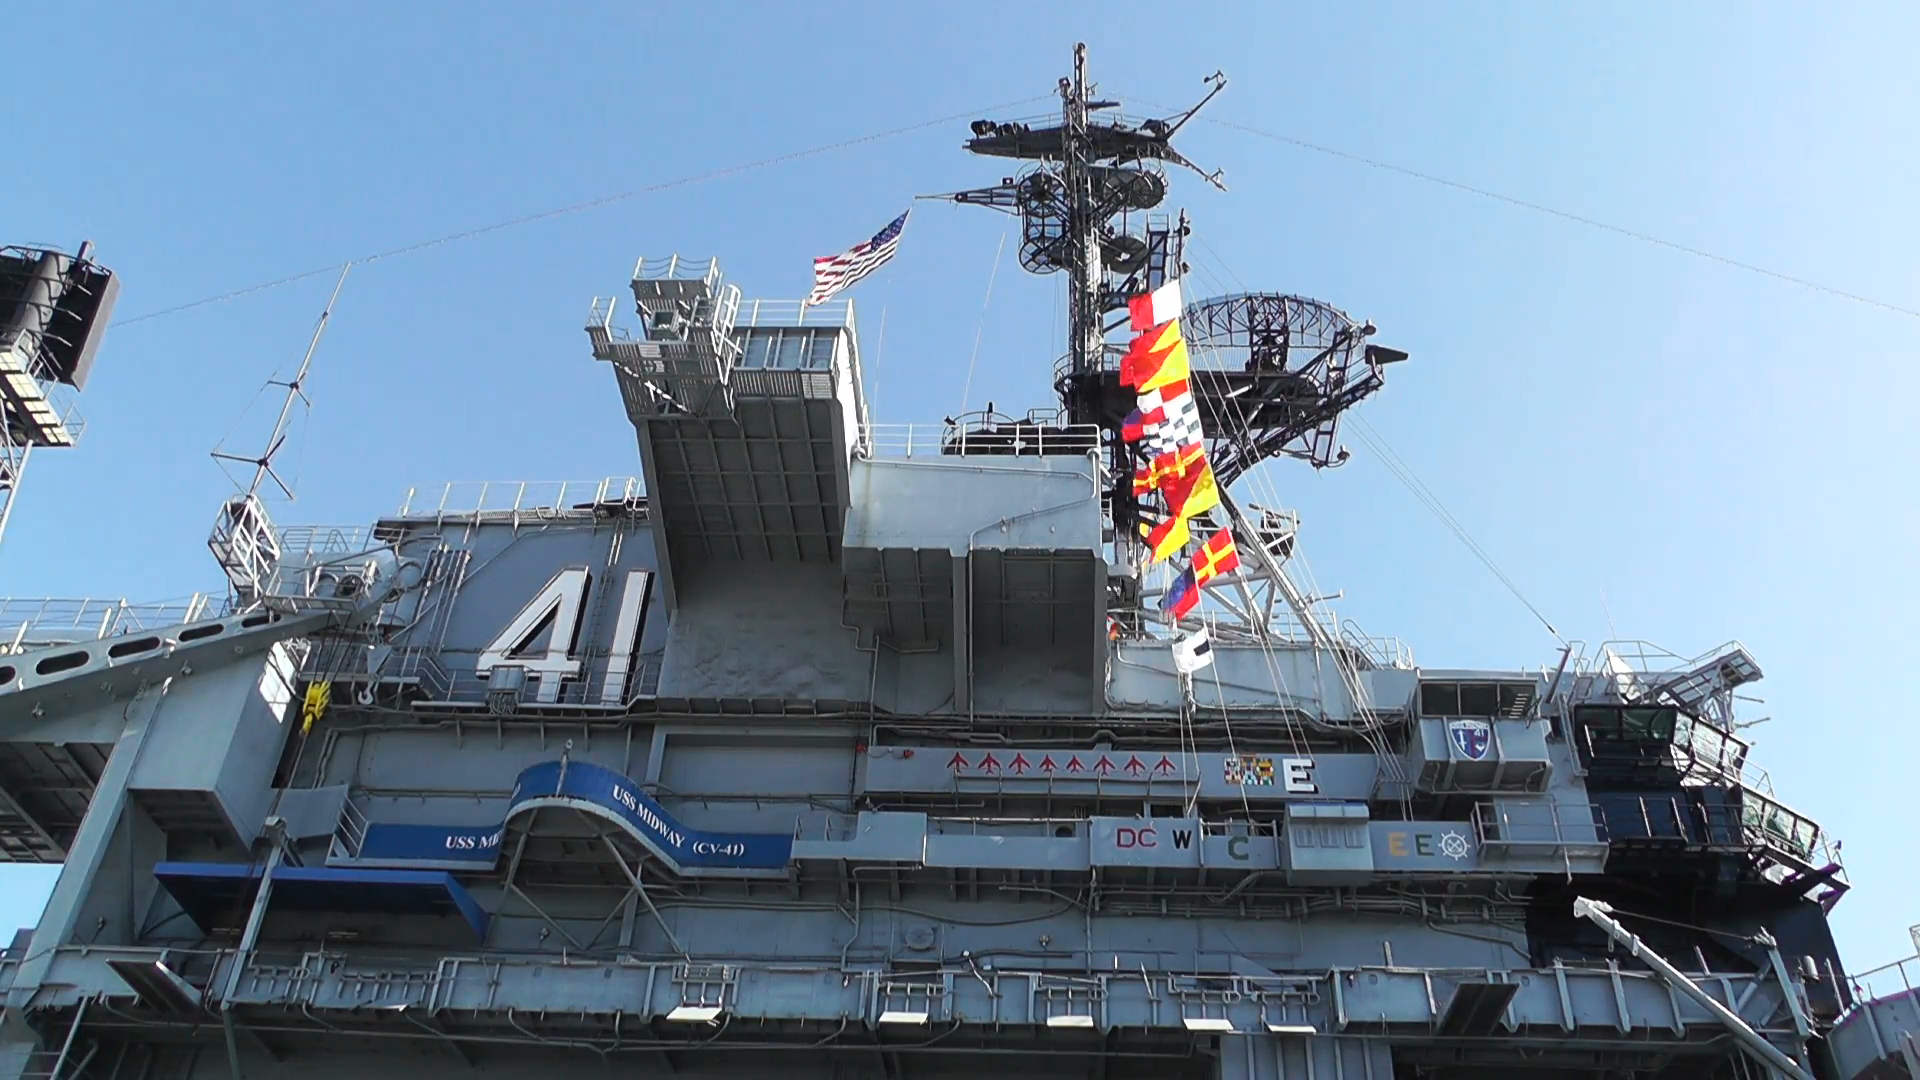 san-diego-naval-base-california-usalargest-naval-base-of-the-united-states-armymidway-carrier-uss-midway-cv-41-started-its-operation-in-world-war-ii-and-was-in-vietnam-and-the-desert-stormtoday-its-a-museum-in-san-diego_nwgeq50y6e__F0000.png